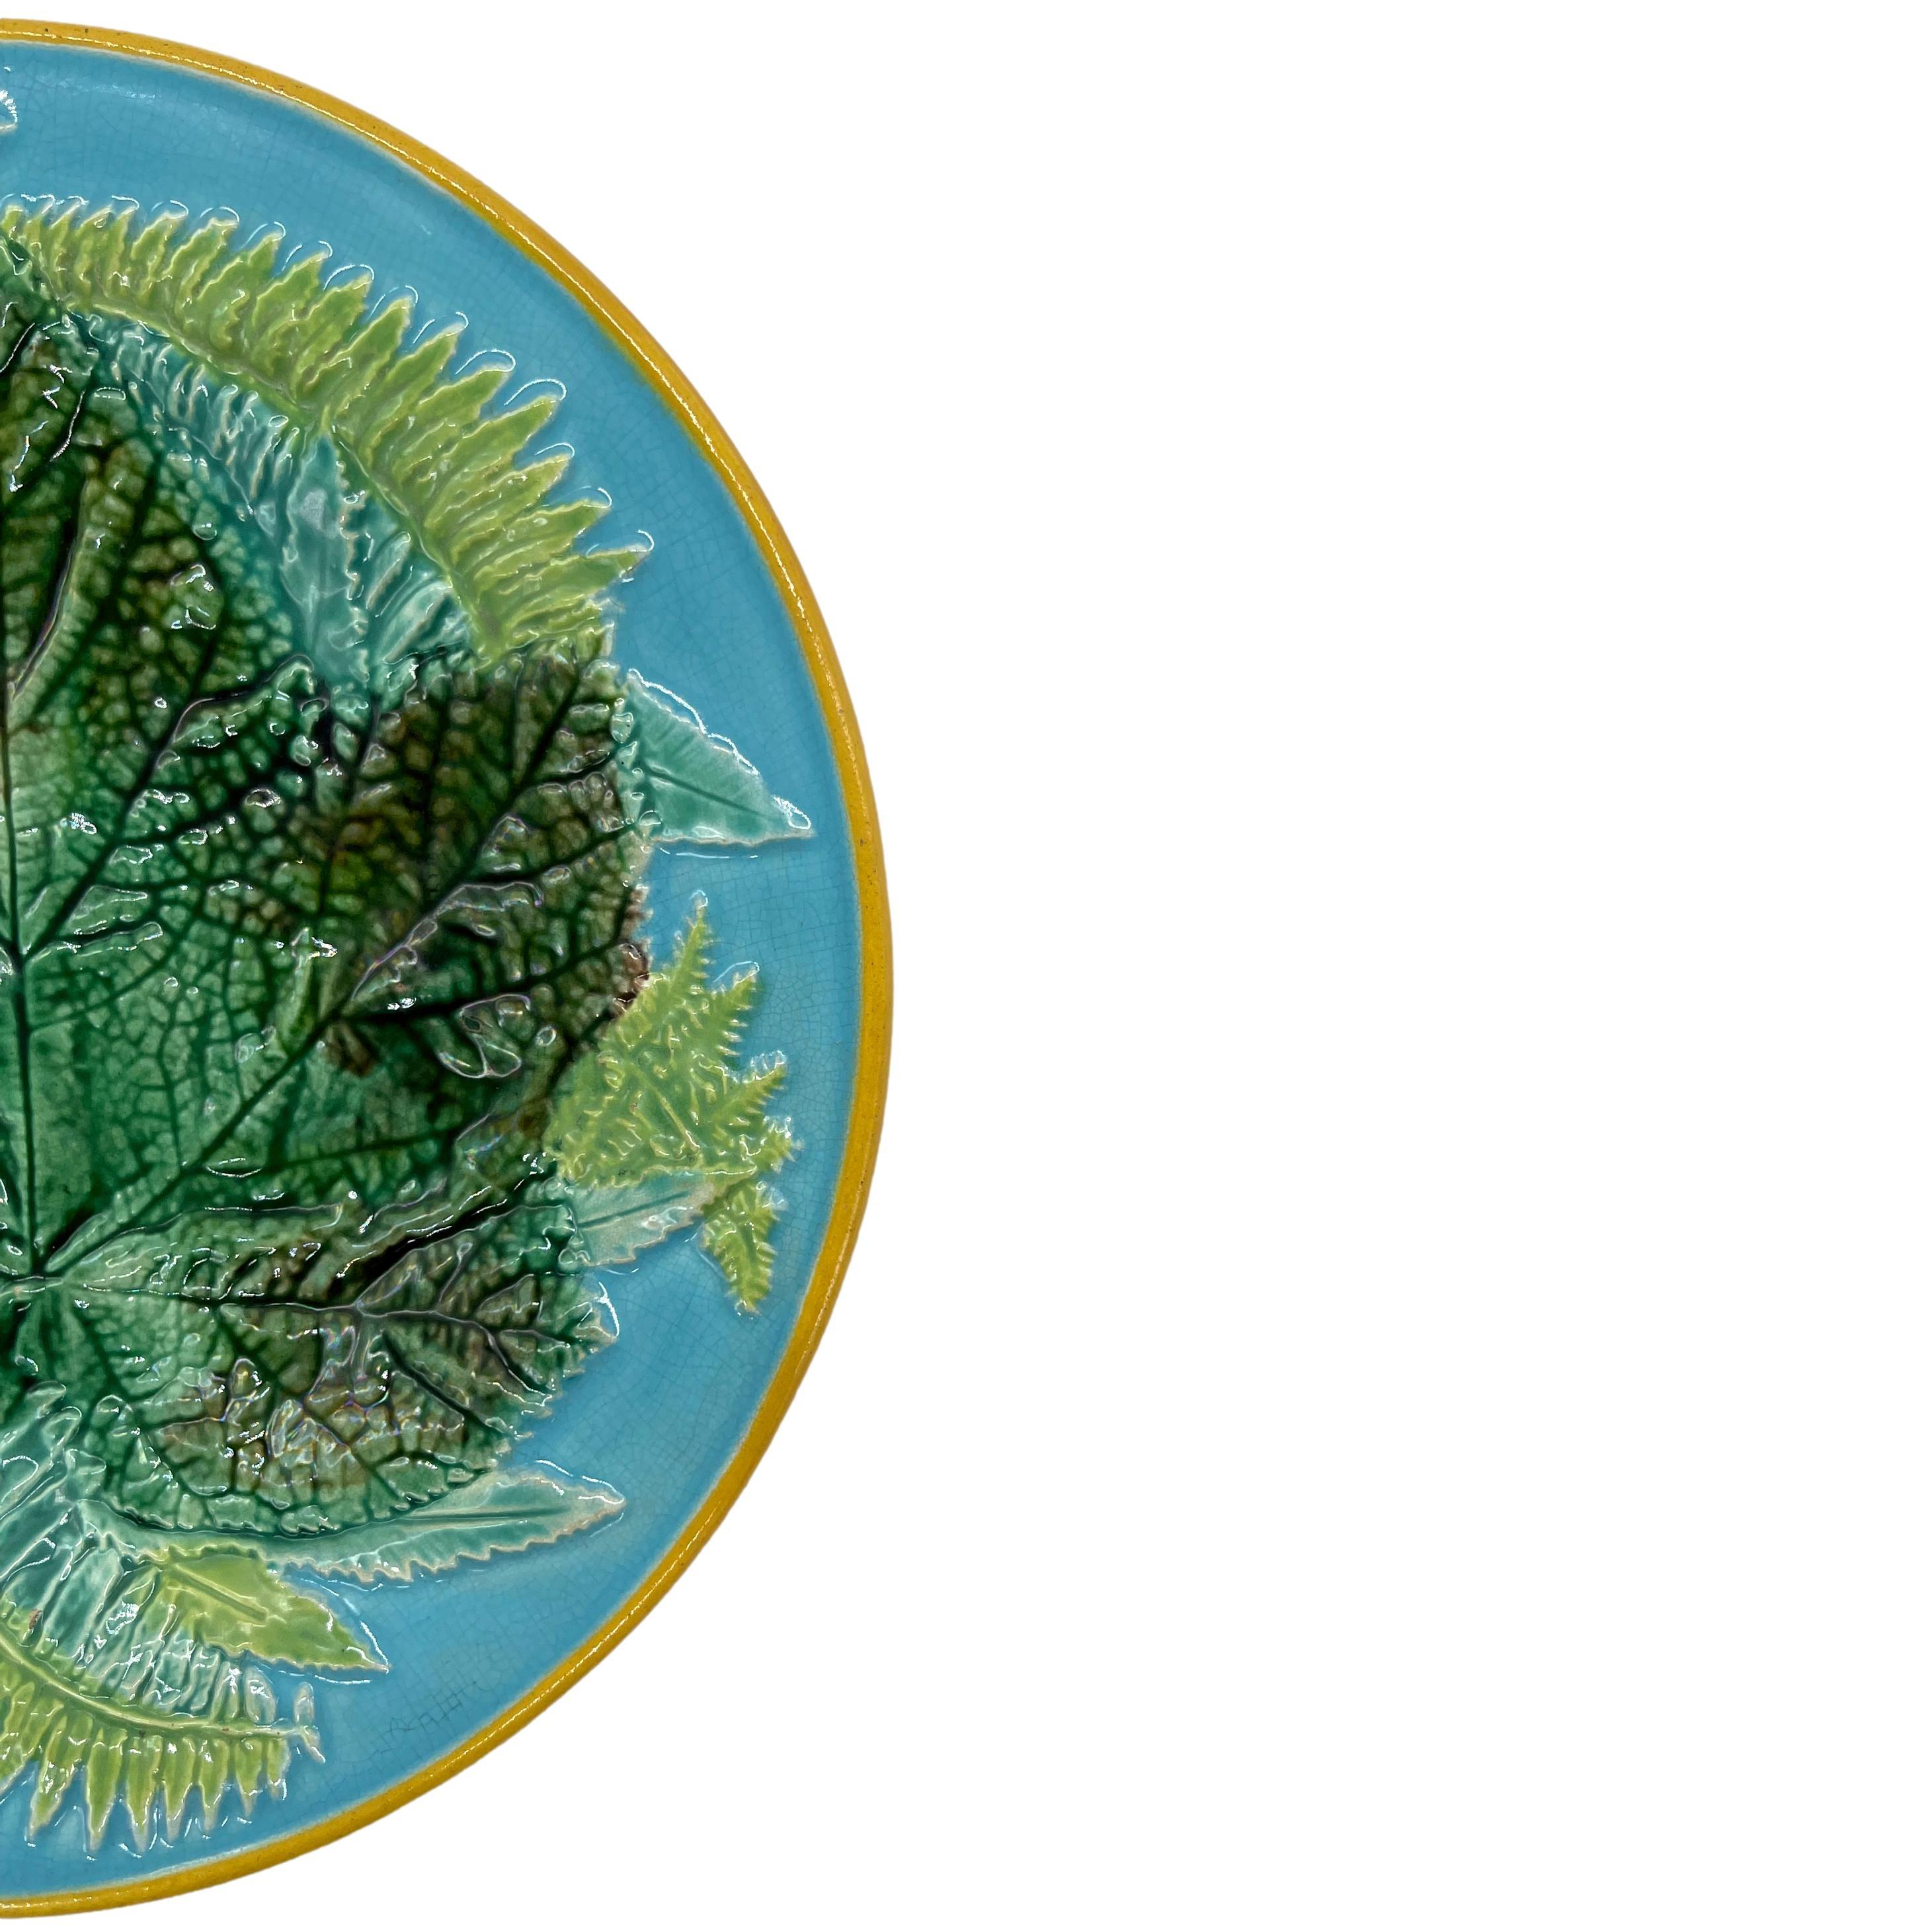 Victorian George Jones Majolica Maple Leaf and Ferns Plate on Turquoise Ground, ca. 1873